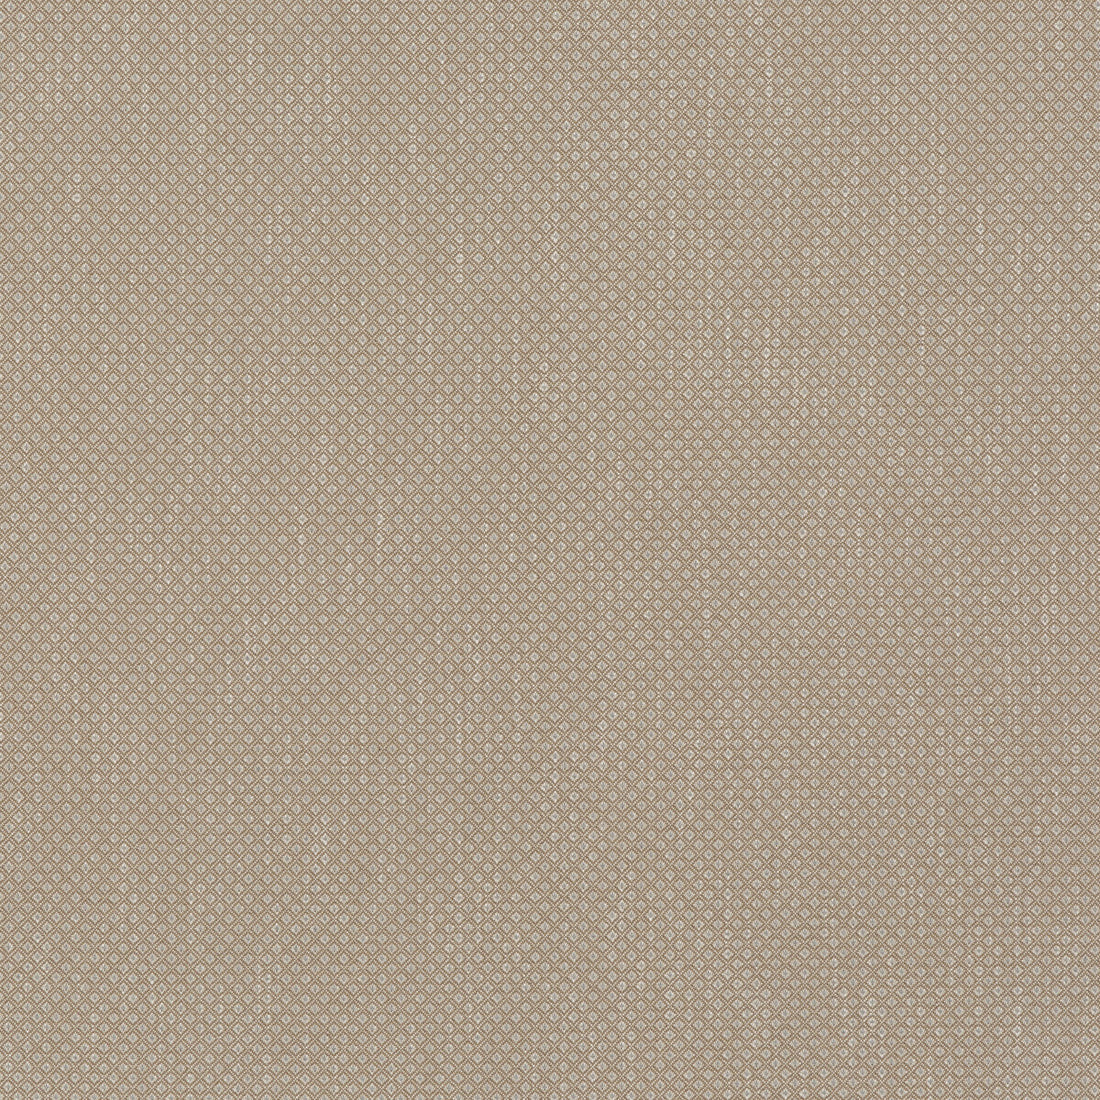 Morley fabric in sand color - pattern BF10959.130.0 - by G P &amp; J Baker in the Baker House Textures collection